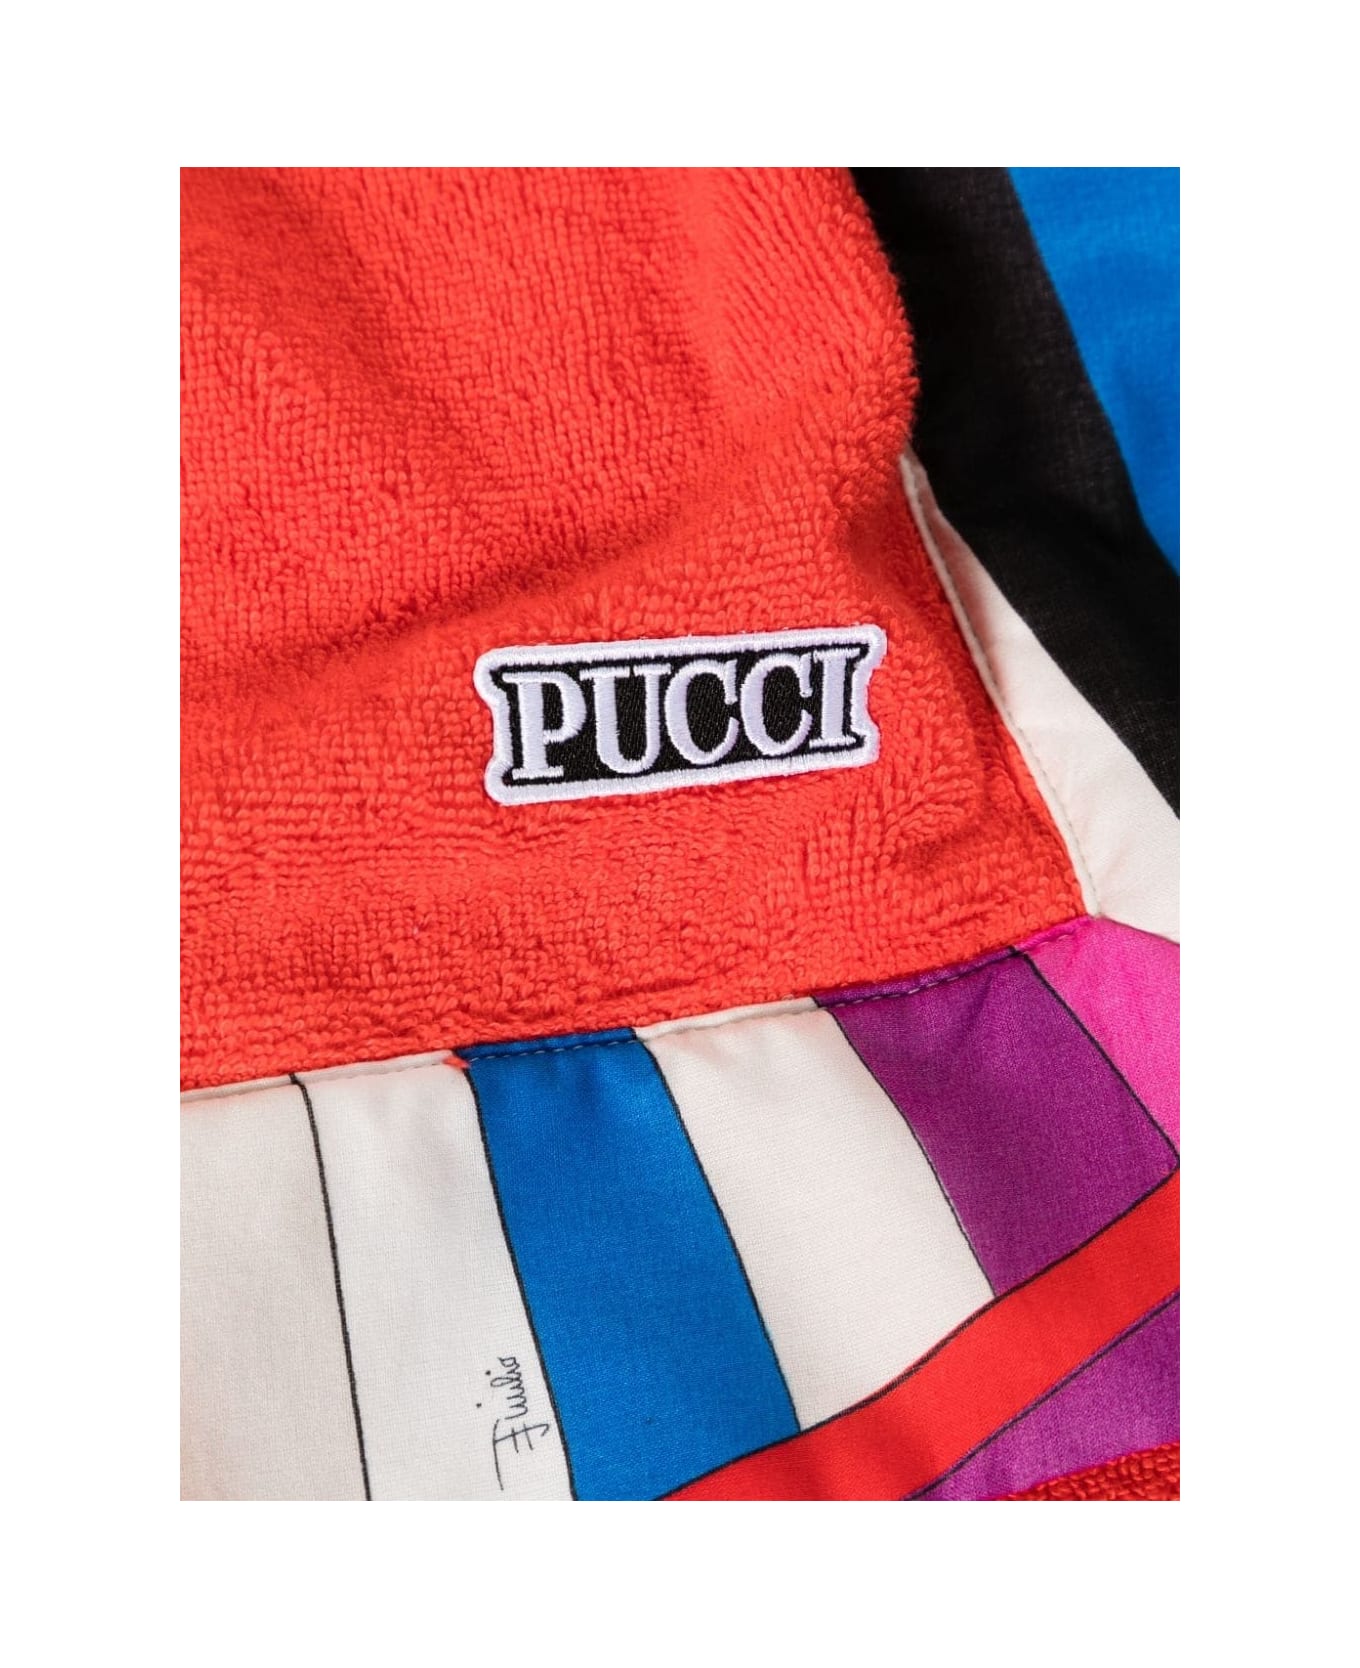 Pucci Red Beach Towel With Iride Print Border - Red